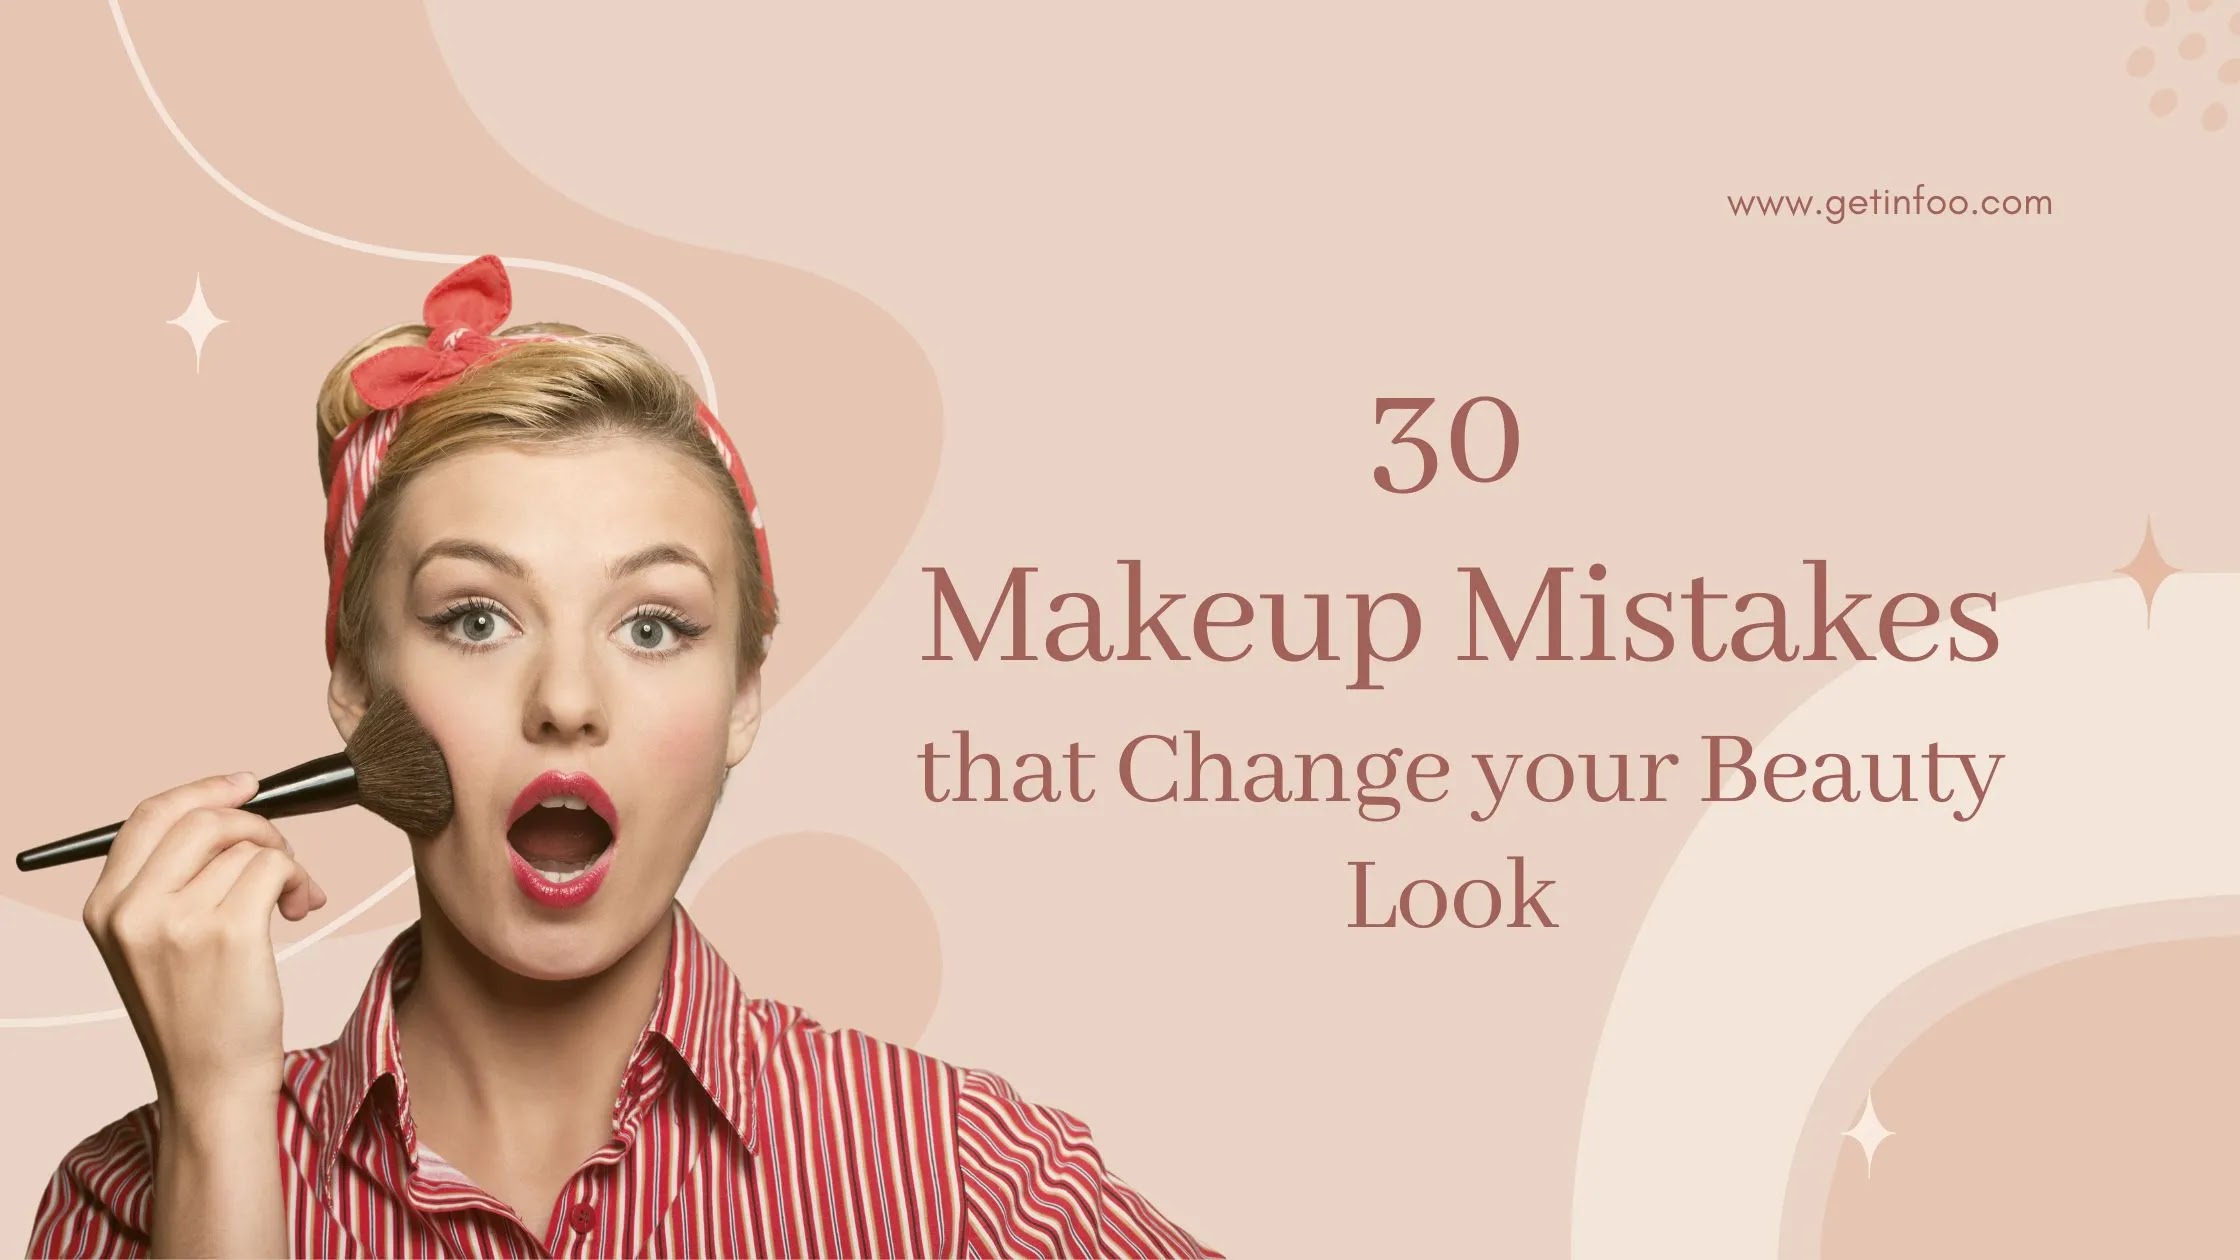 30 Makeup Mistakes that Change your Beauty Look